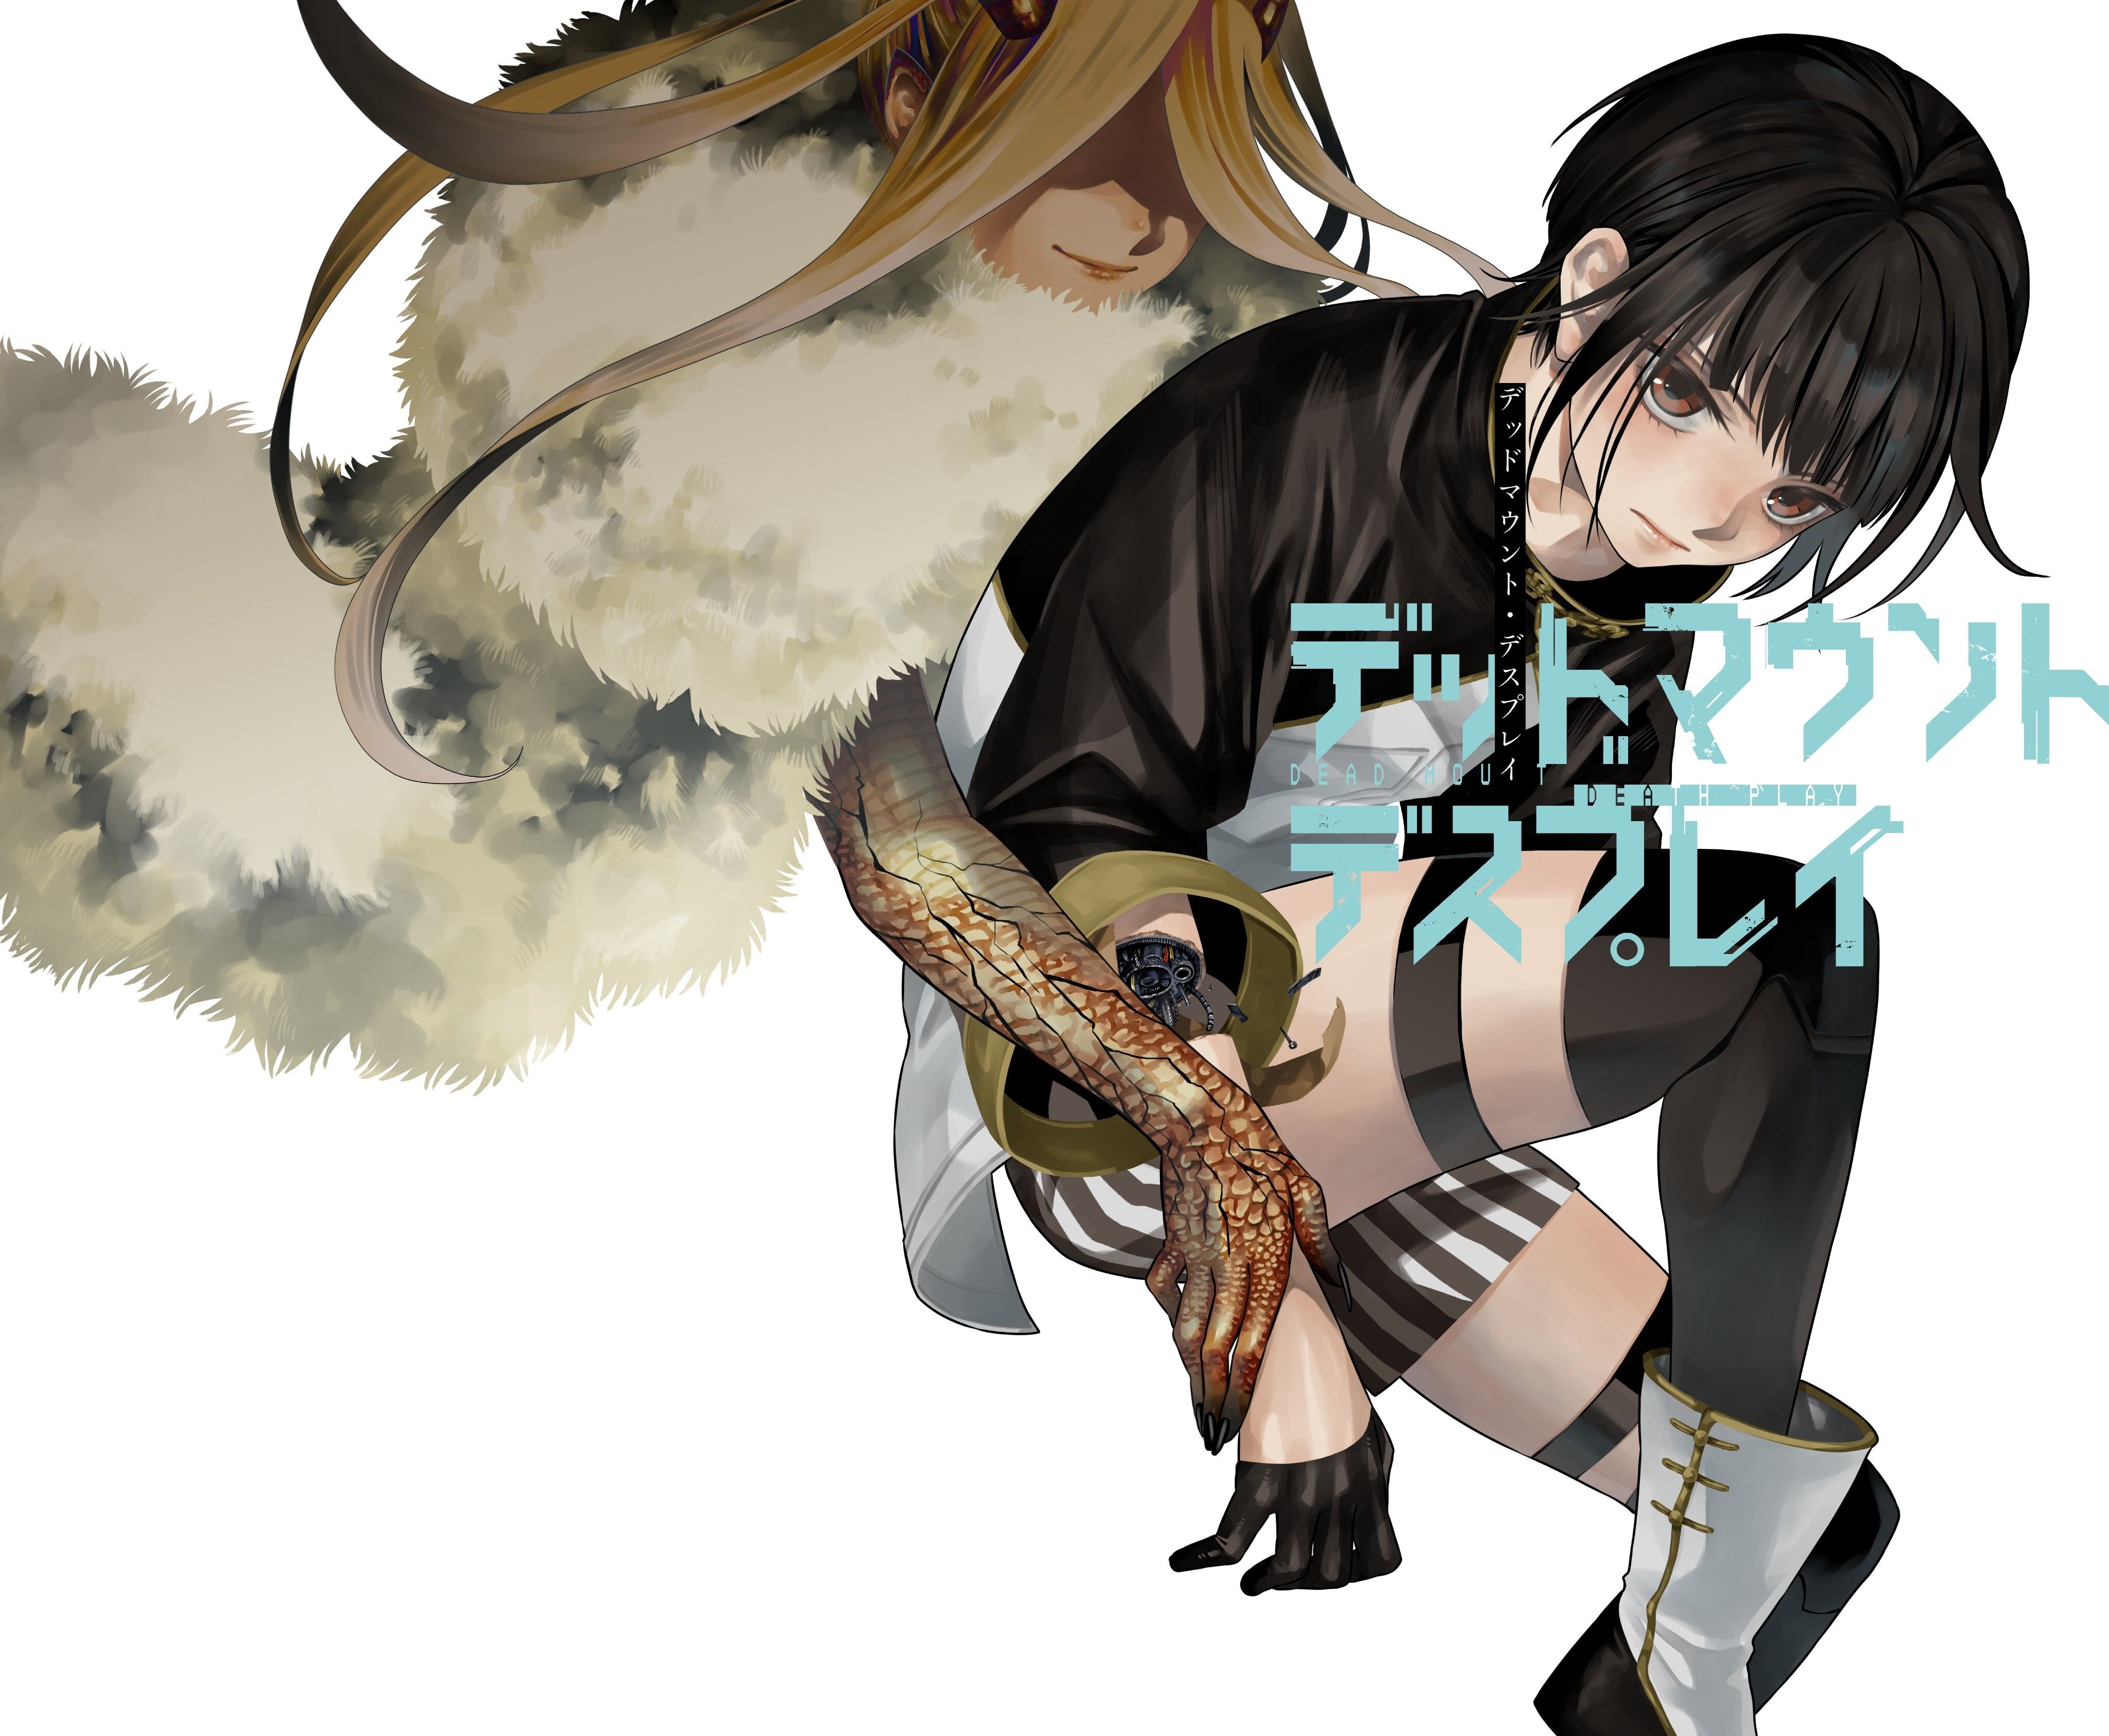 Dead Mount Death Play TV Anime Reveals Four More Part 2 Characters